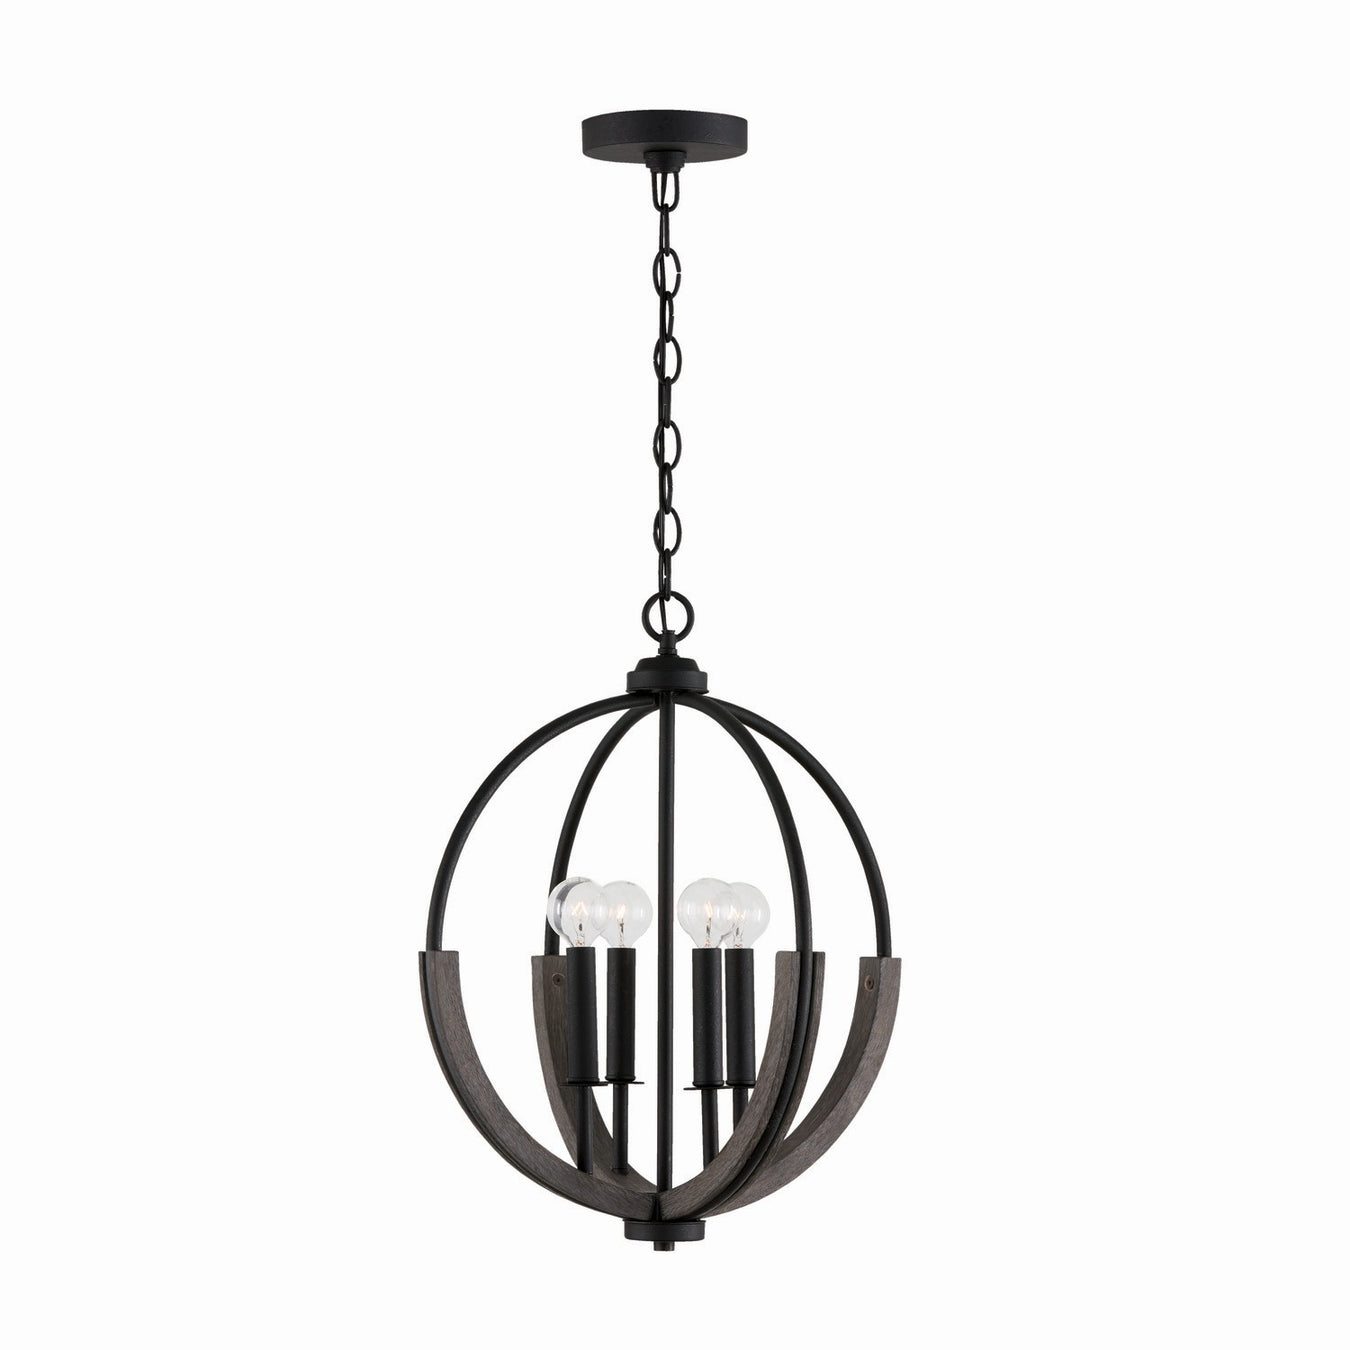 Clive Four Light Pendant in Carbon Grey and Black Iron